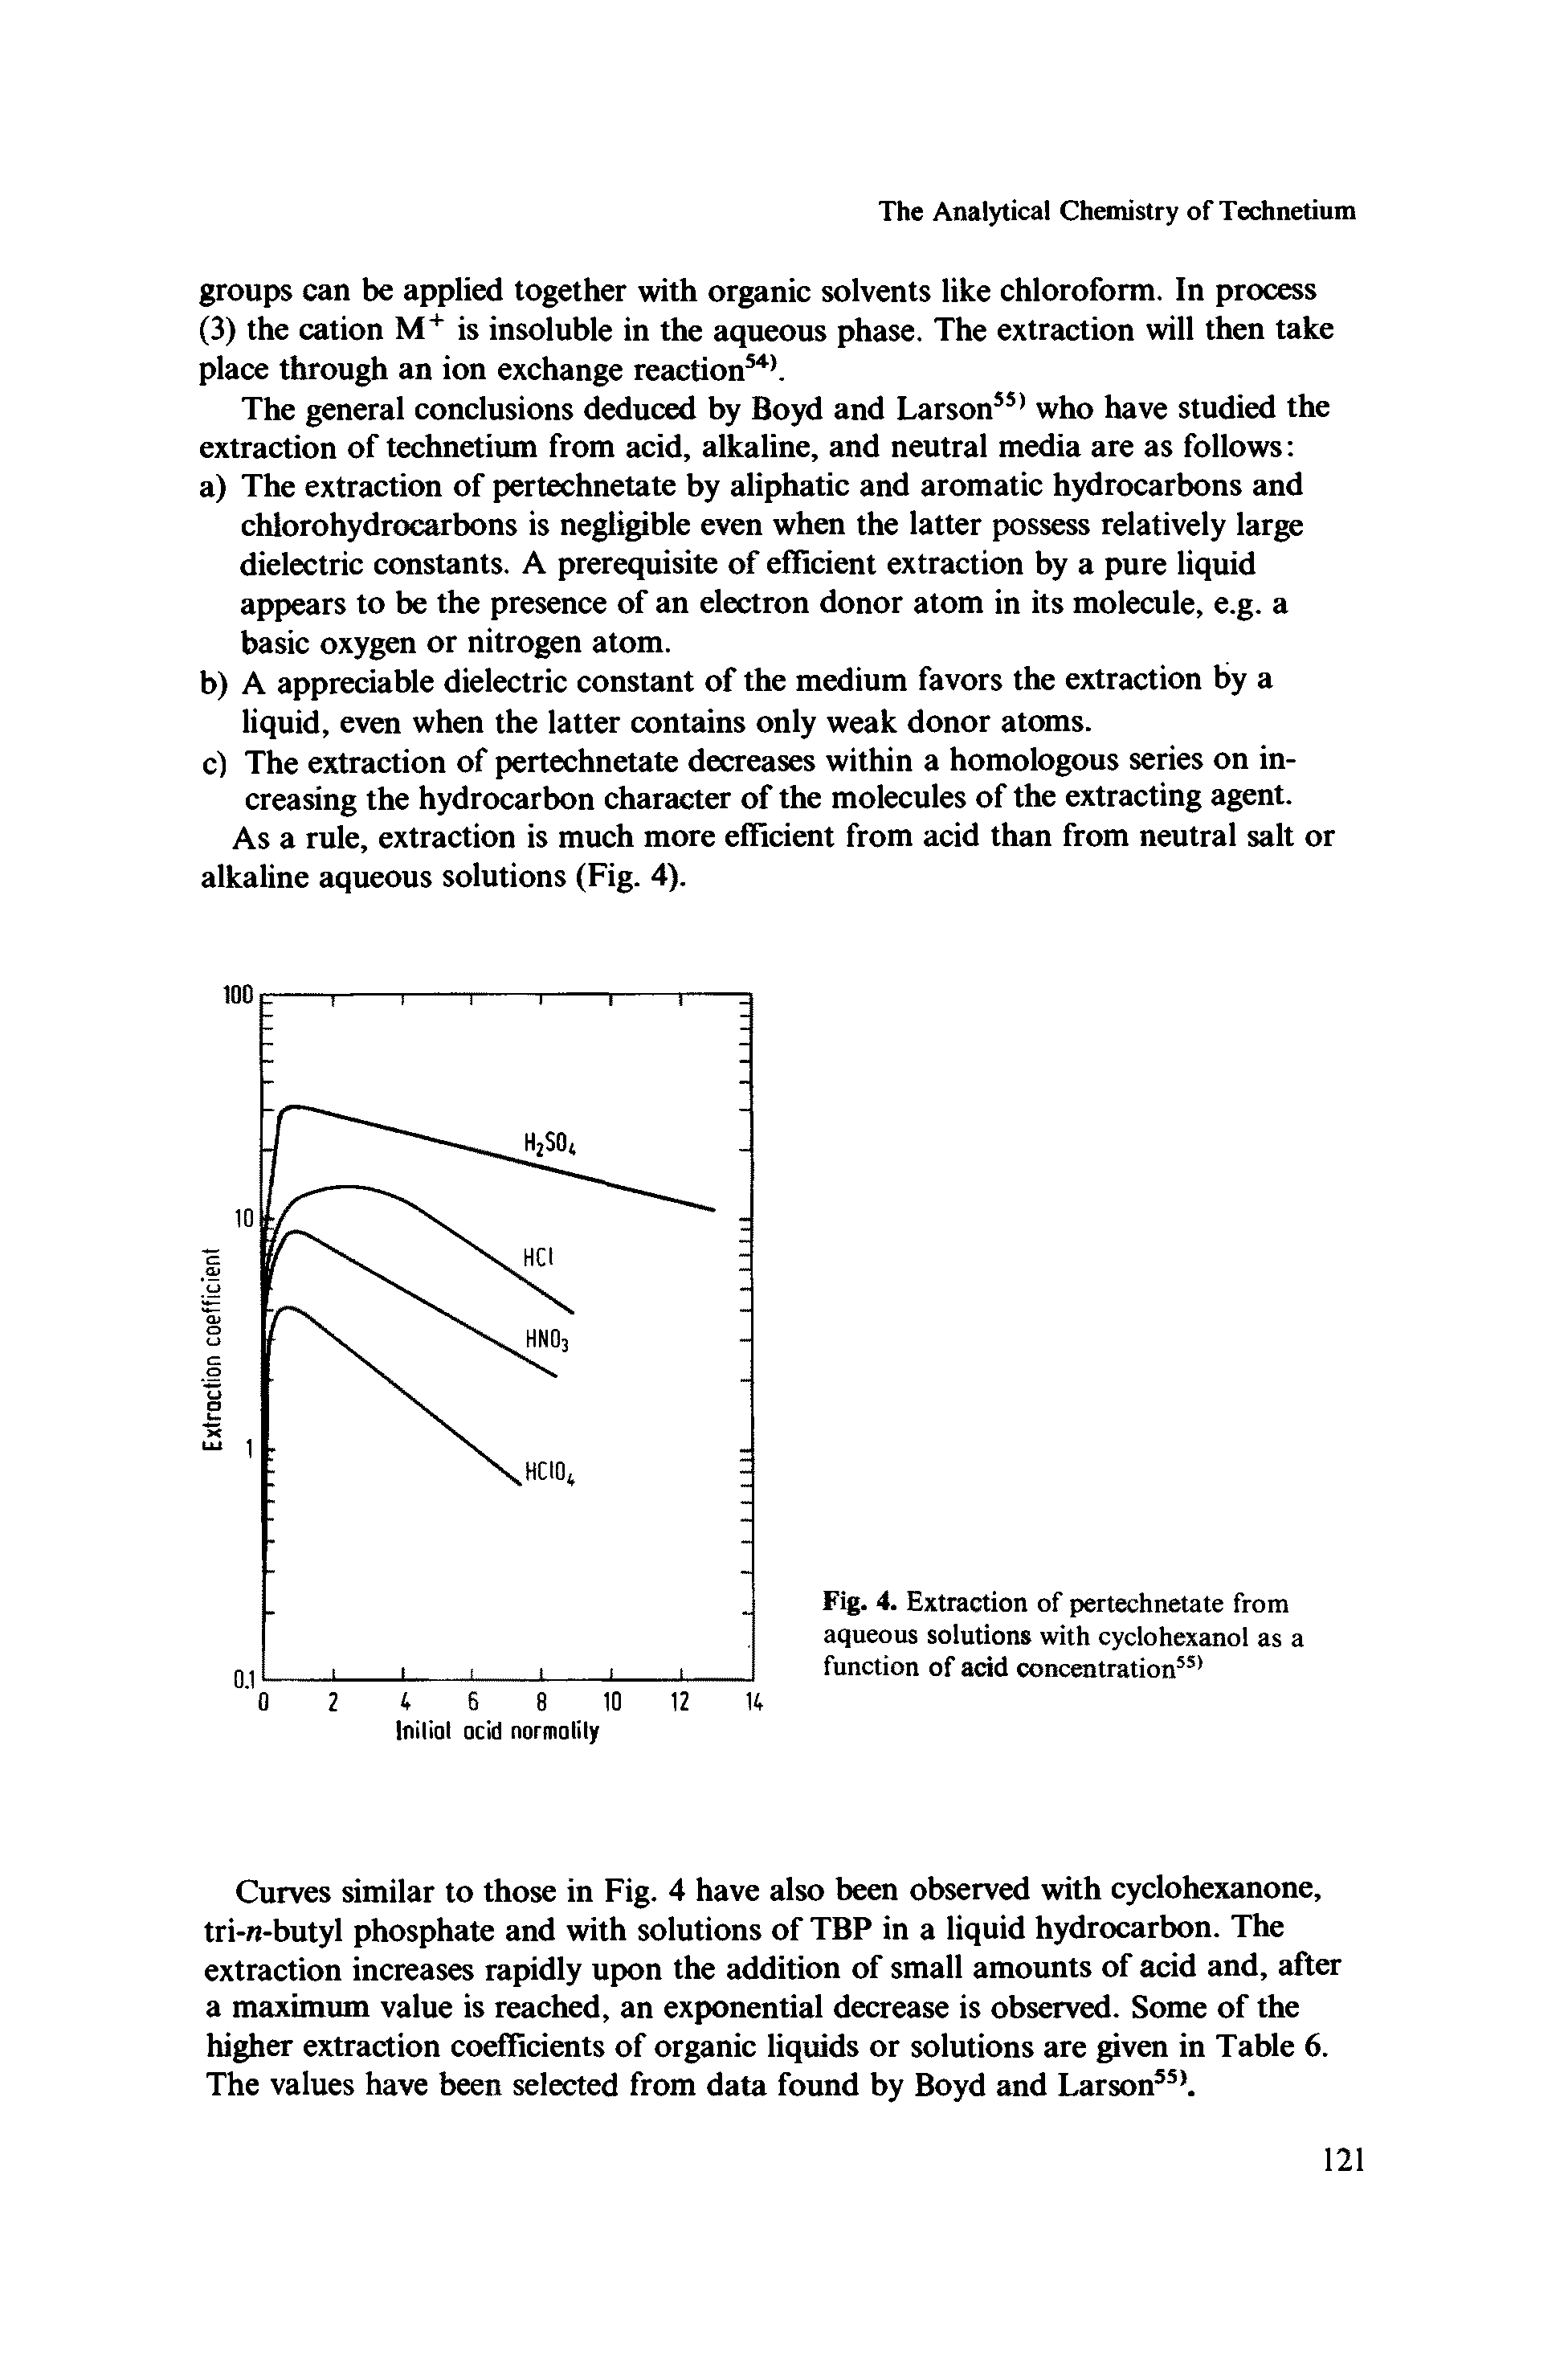 Fig. 4. Extraction of pertechnetate from aqueous solutions with cyclohexanol as a function of acid concentration ...